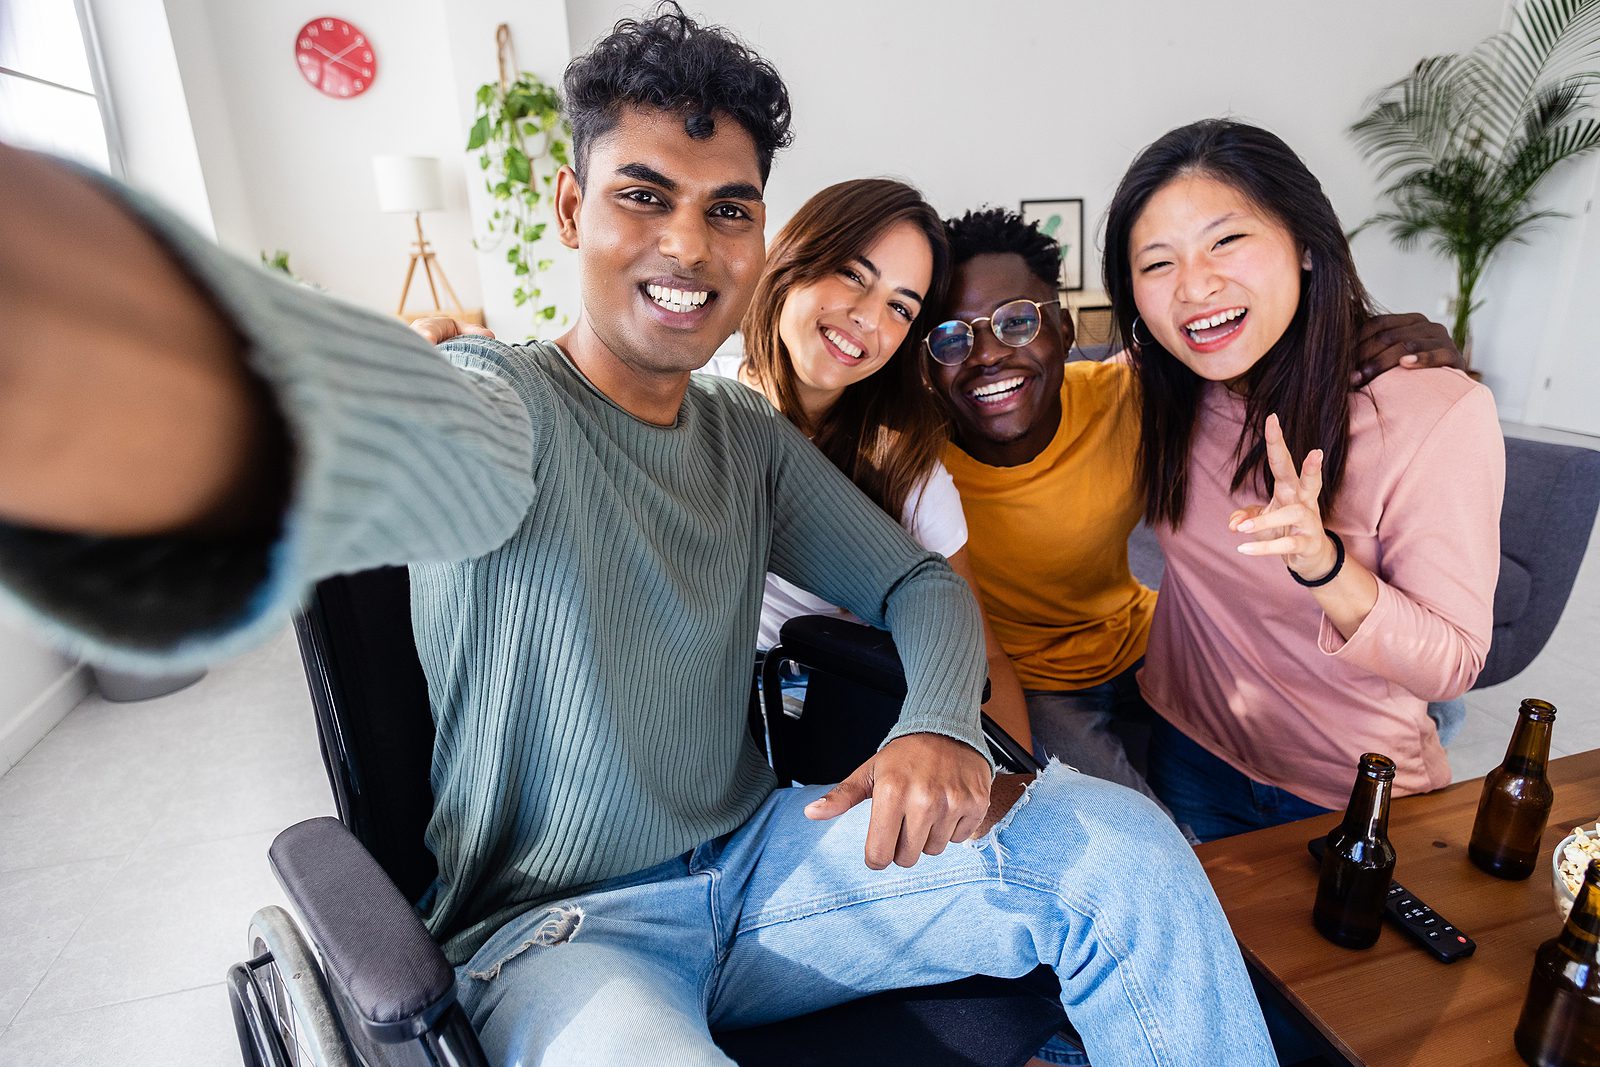 Inclusion and diversity concept with young indian man in wheelchair taking selfie portrait with multiracial friends. United group of diverse young people having fun together at home